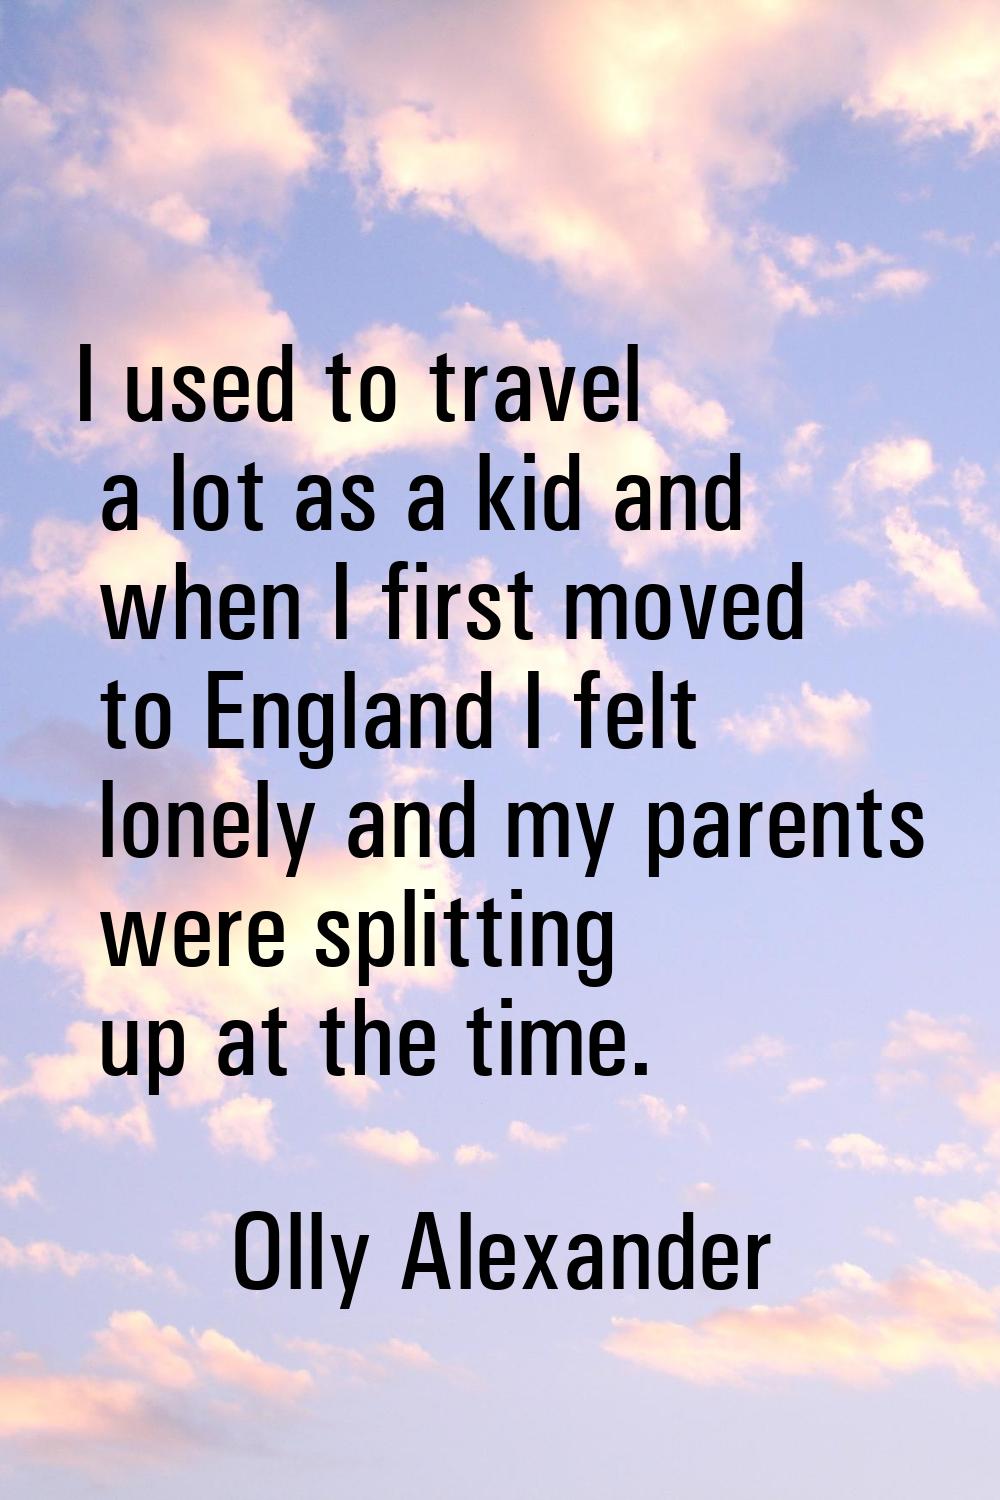 I used to travel a lot as a kid and when I first moved to England I felt lonely and my parents were